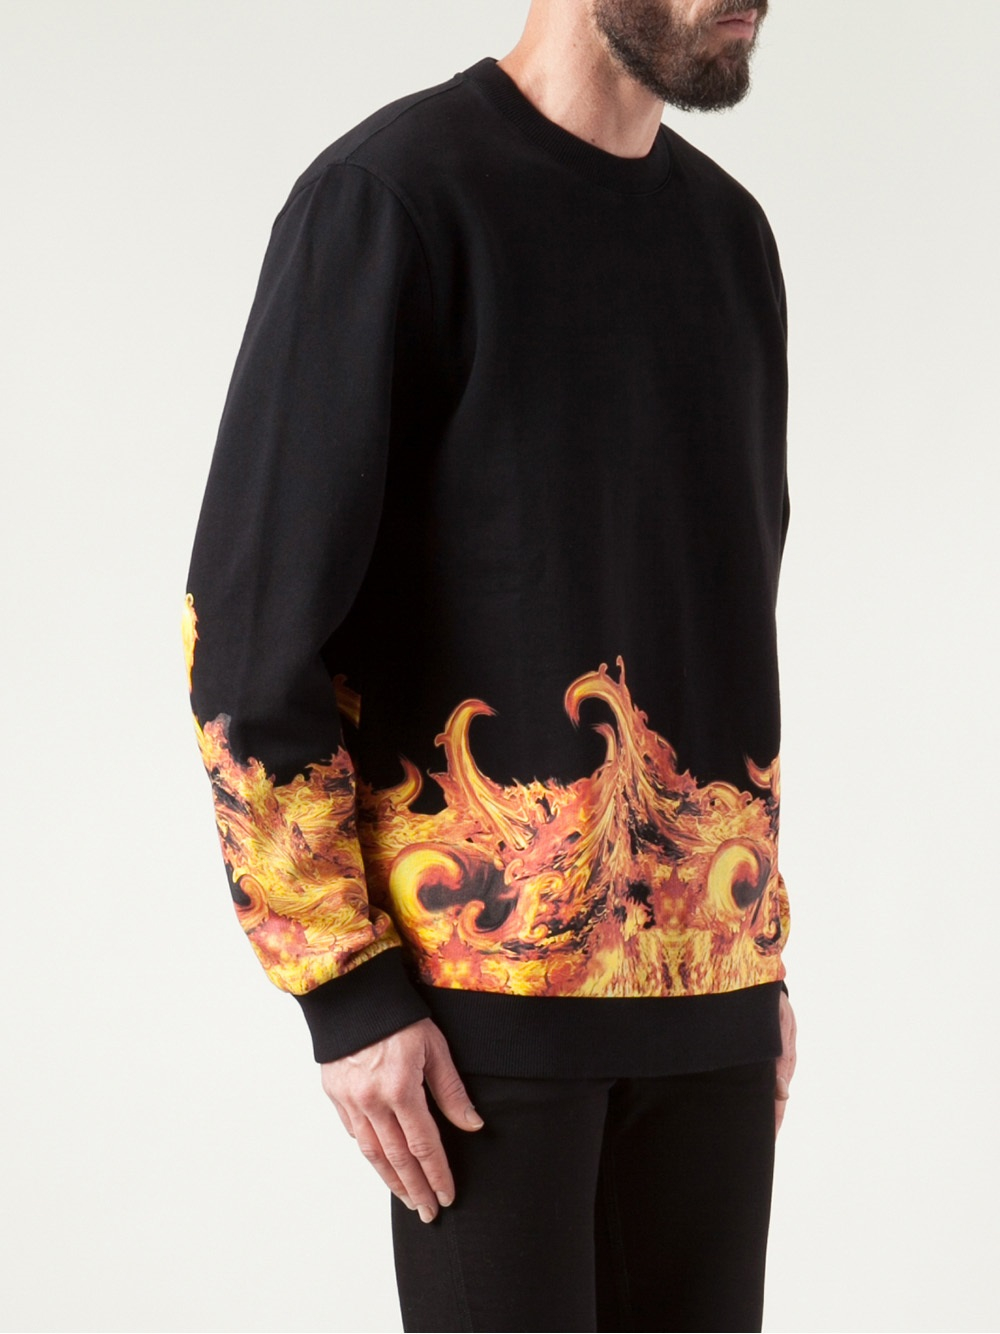 Givenchy Flame Graphic Sweatshirt in 